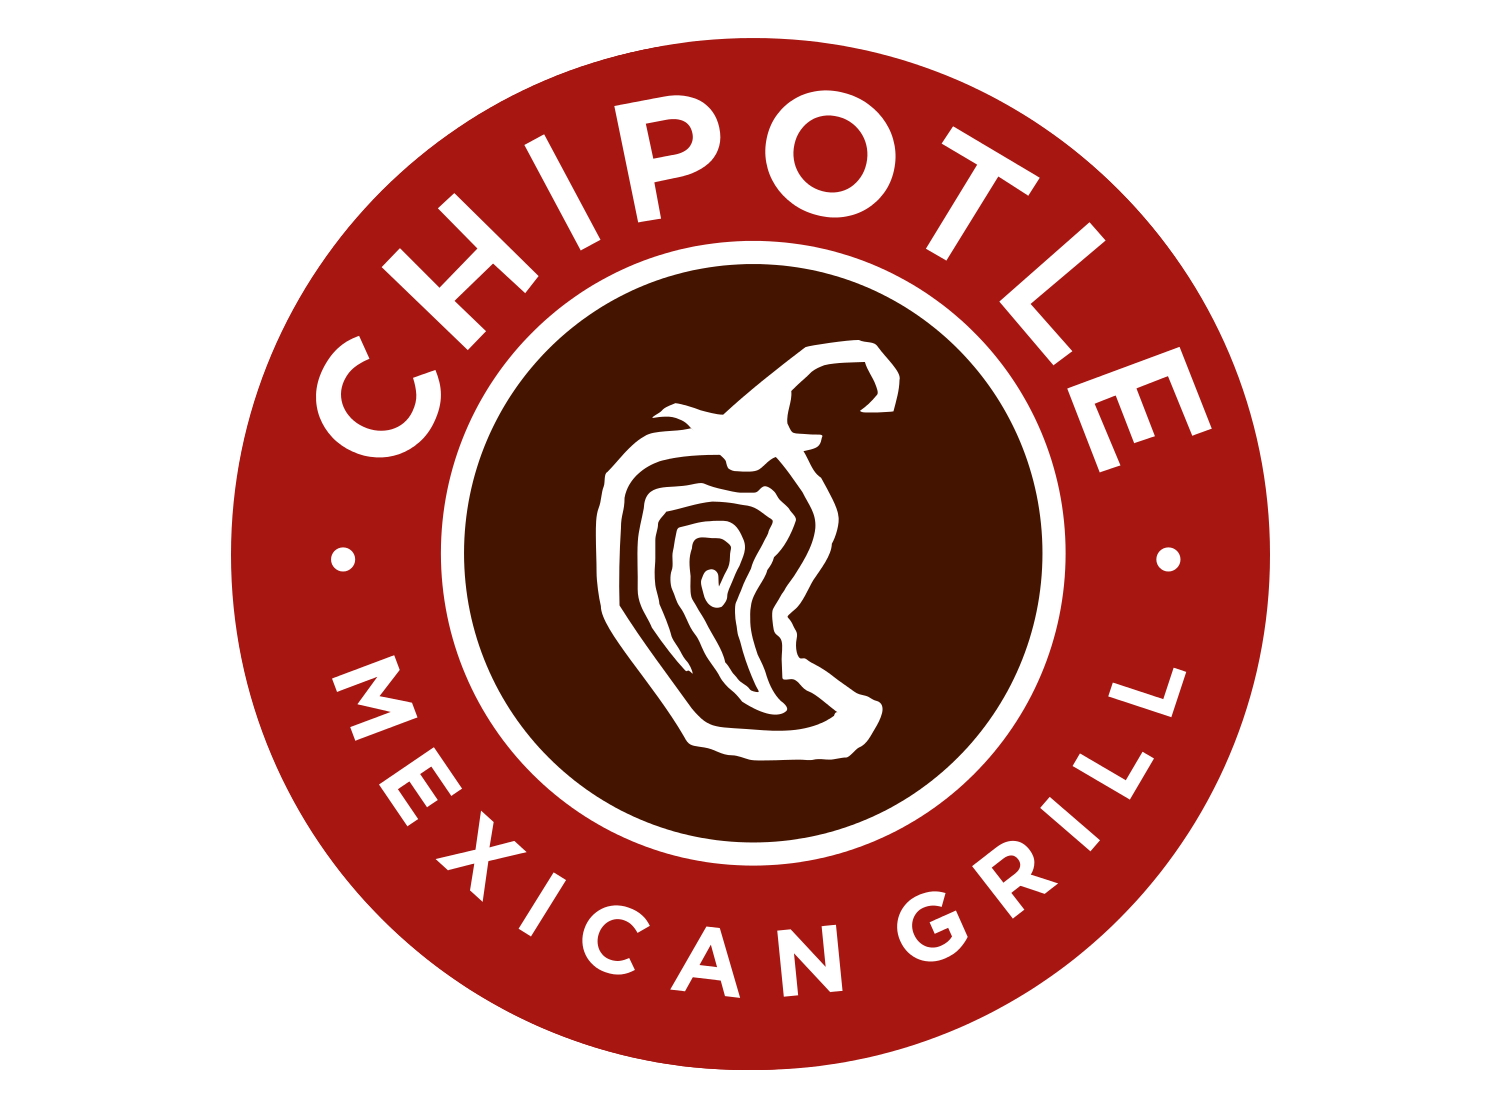 OPINION: Chipotle is superior